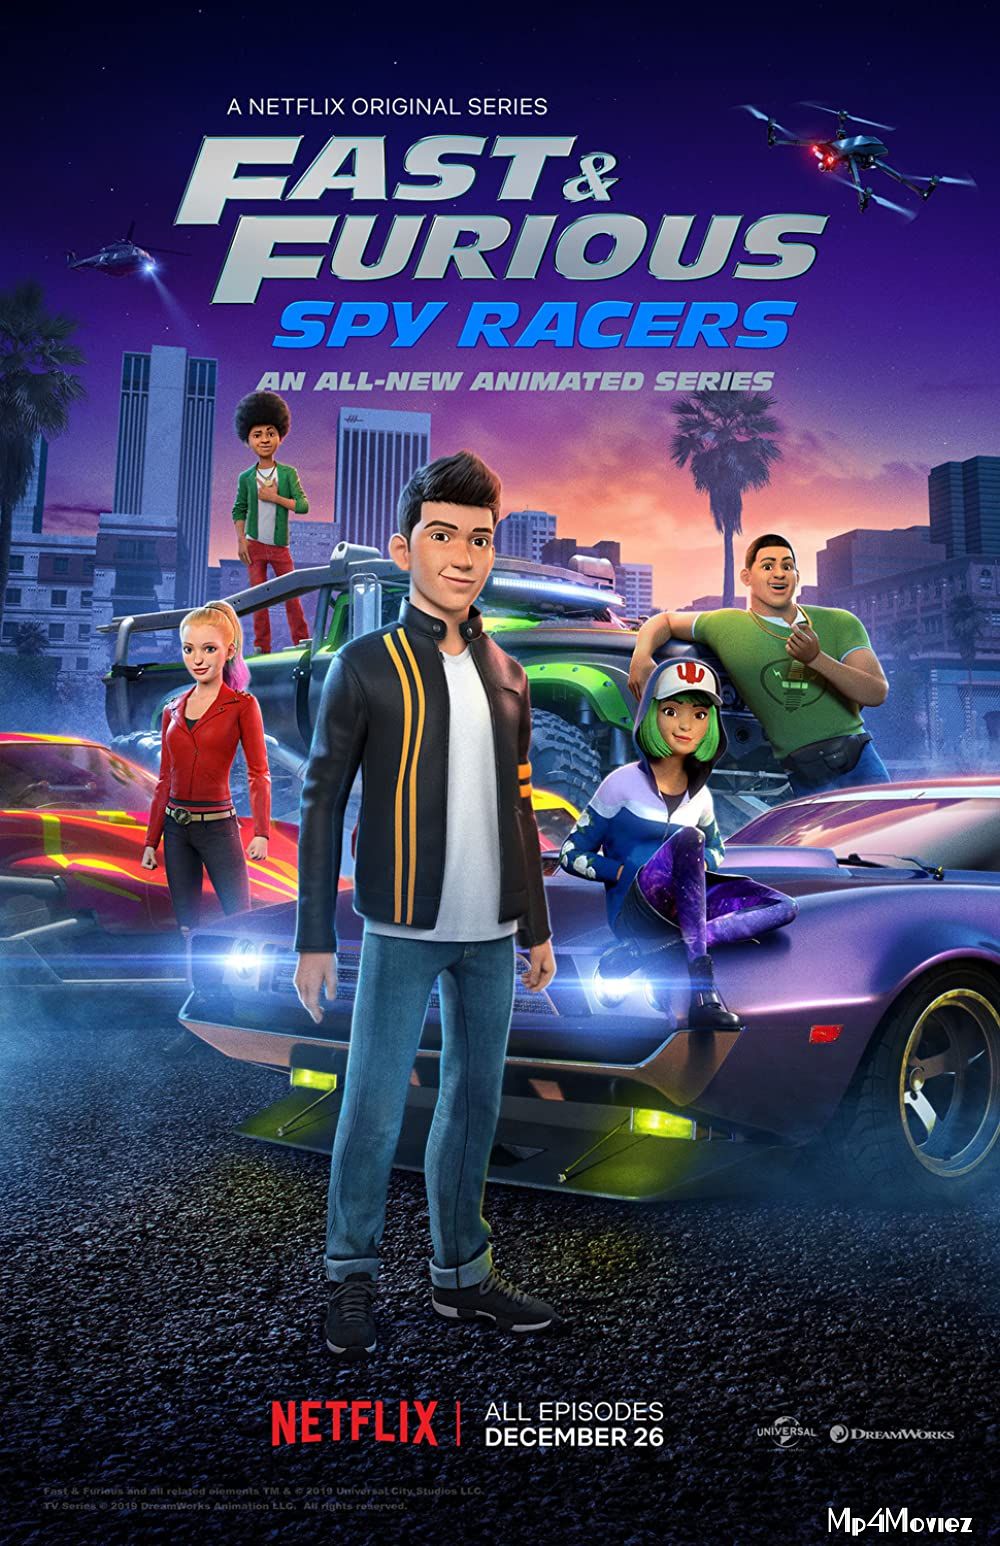 Fast and Furious Spy Racers S03 (2020) Hindi Dubbed Complete Netflix Web Series download full movie